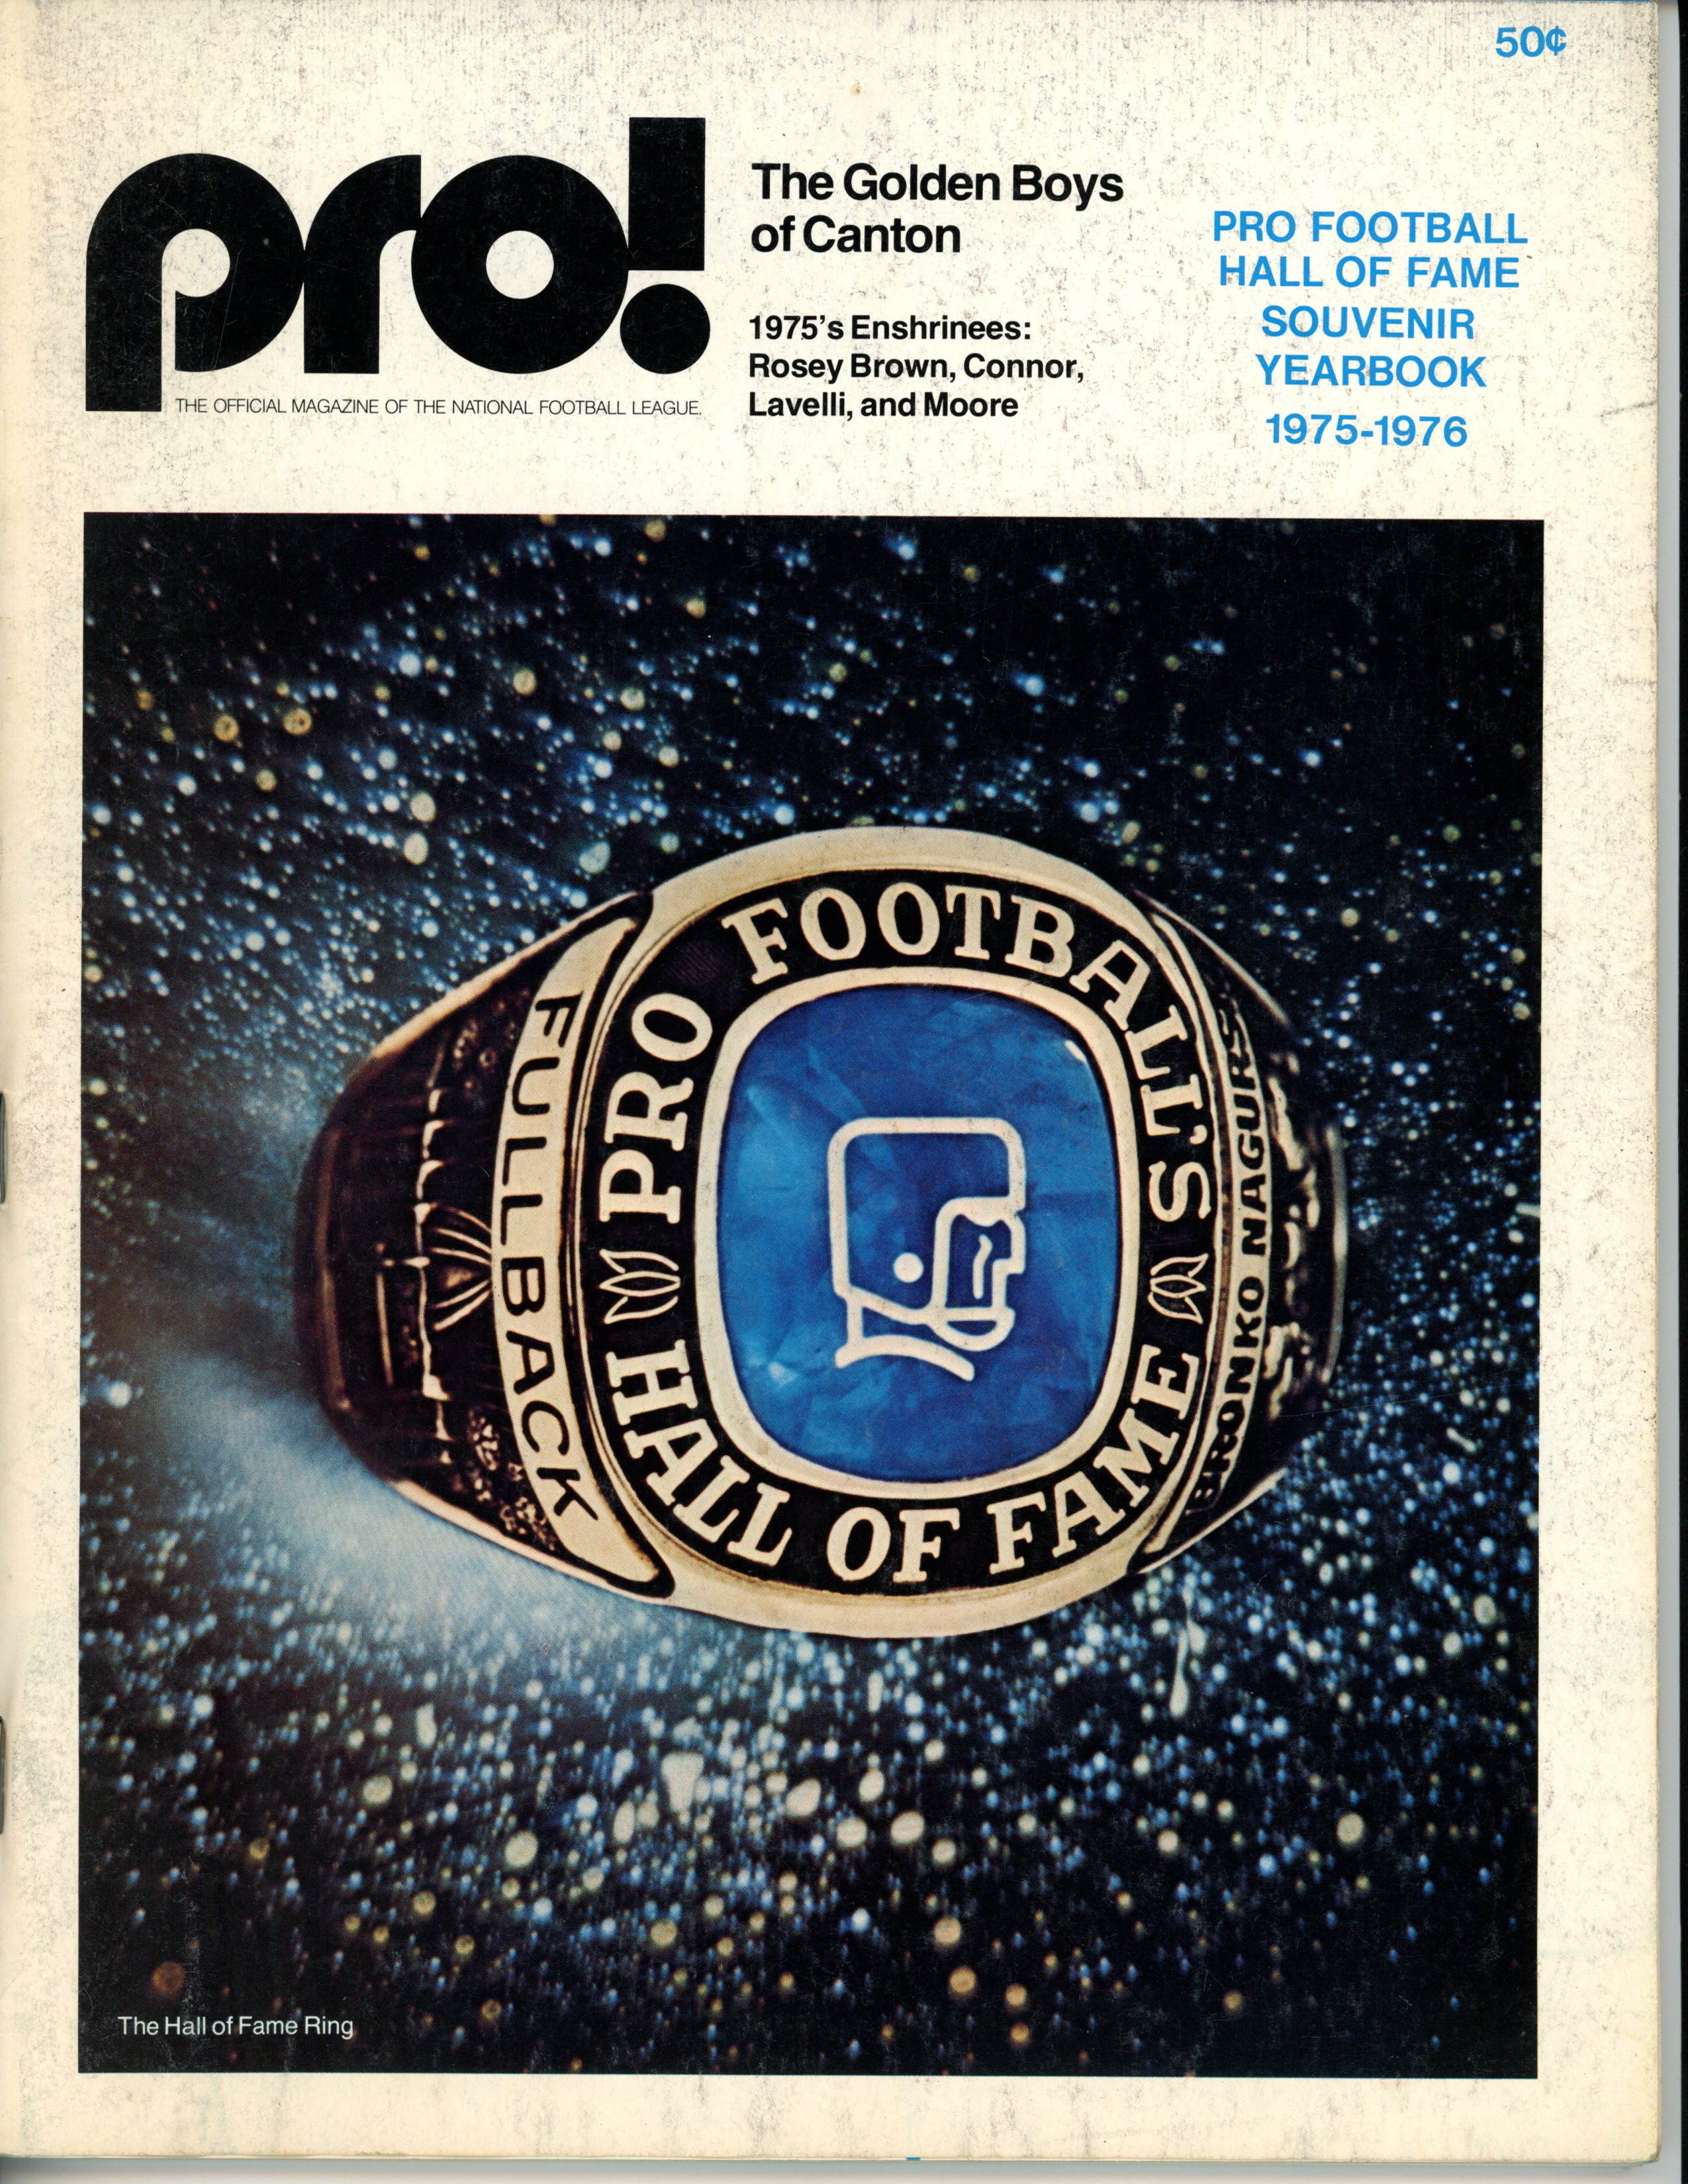 1975-76 Pro! Magazine Pro Football Hall Of Fame Souvenir Yearbook